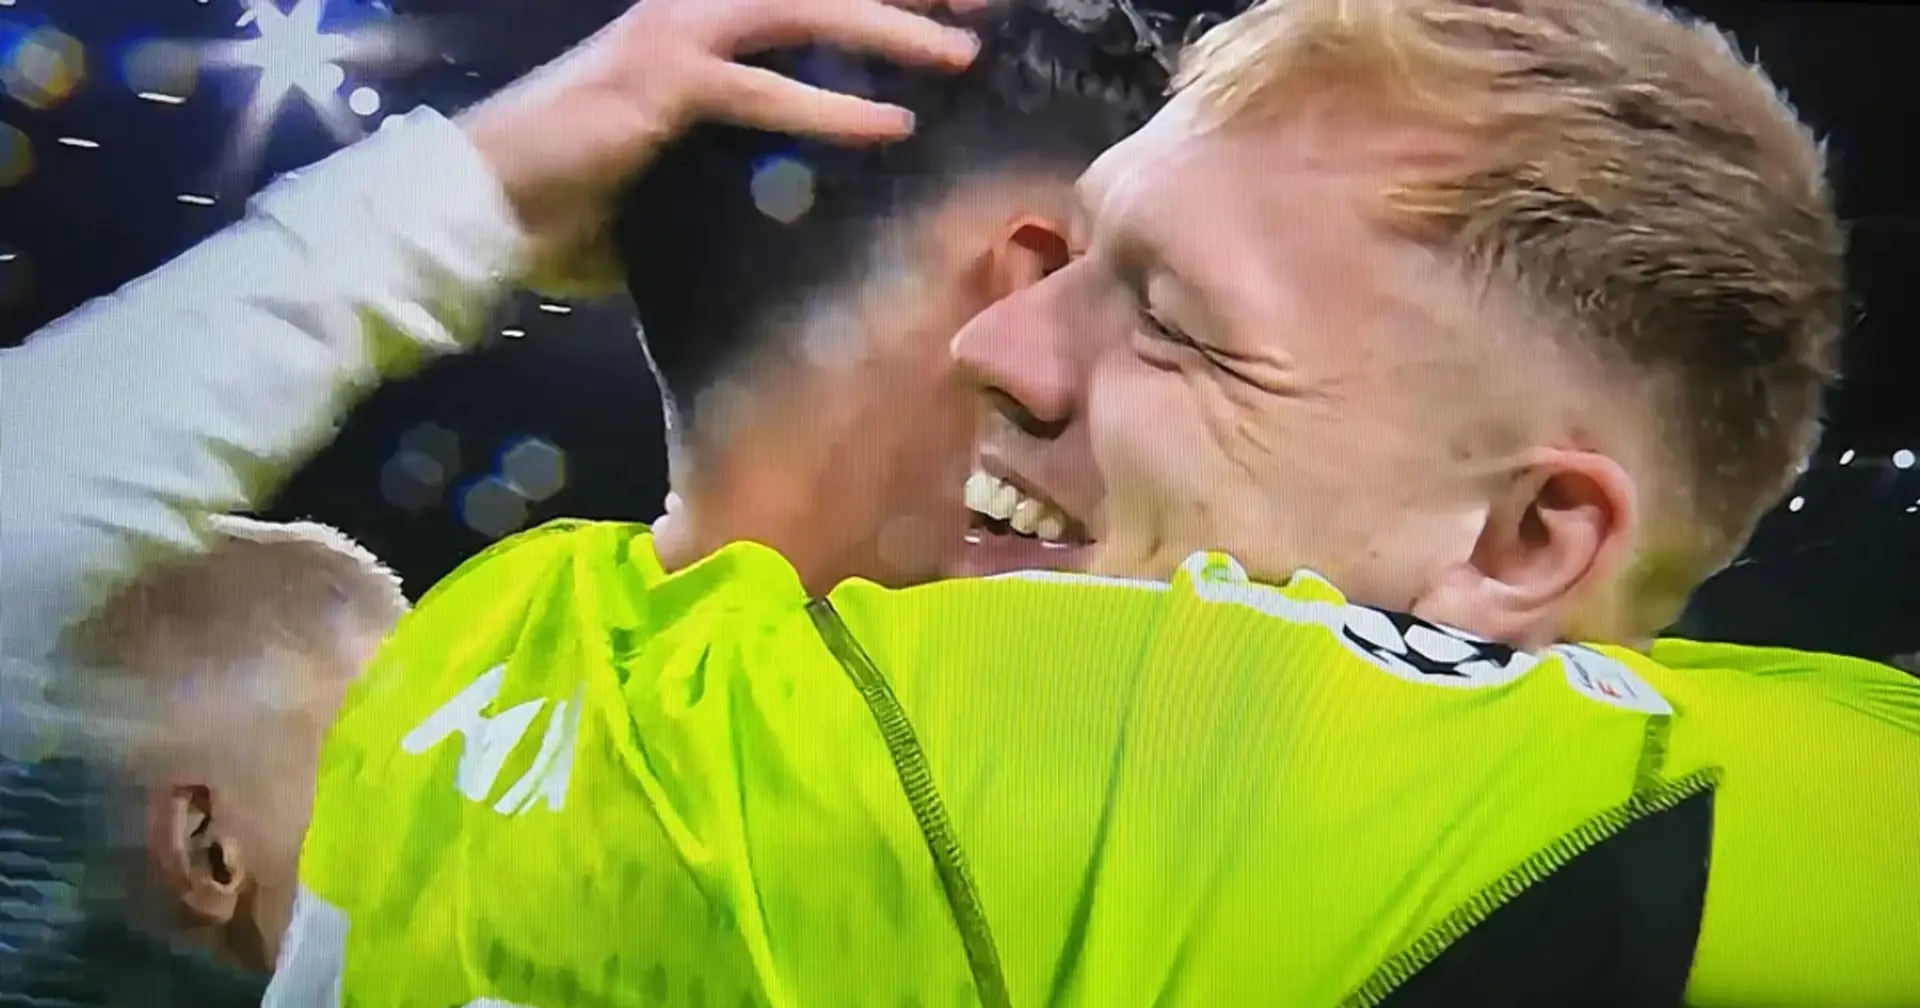 'All I see is two wonderful keepers': Arsenal fans react to viral photo of Raya and Ramsdale after Porto